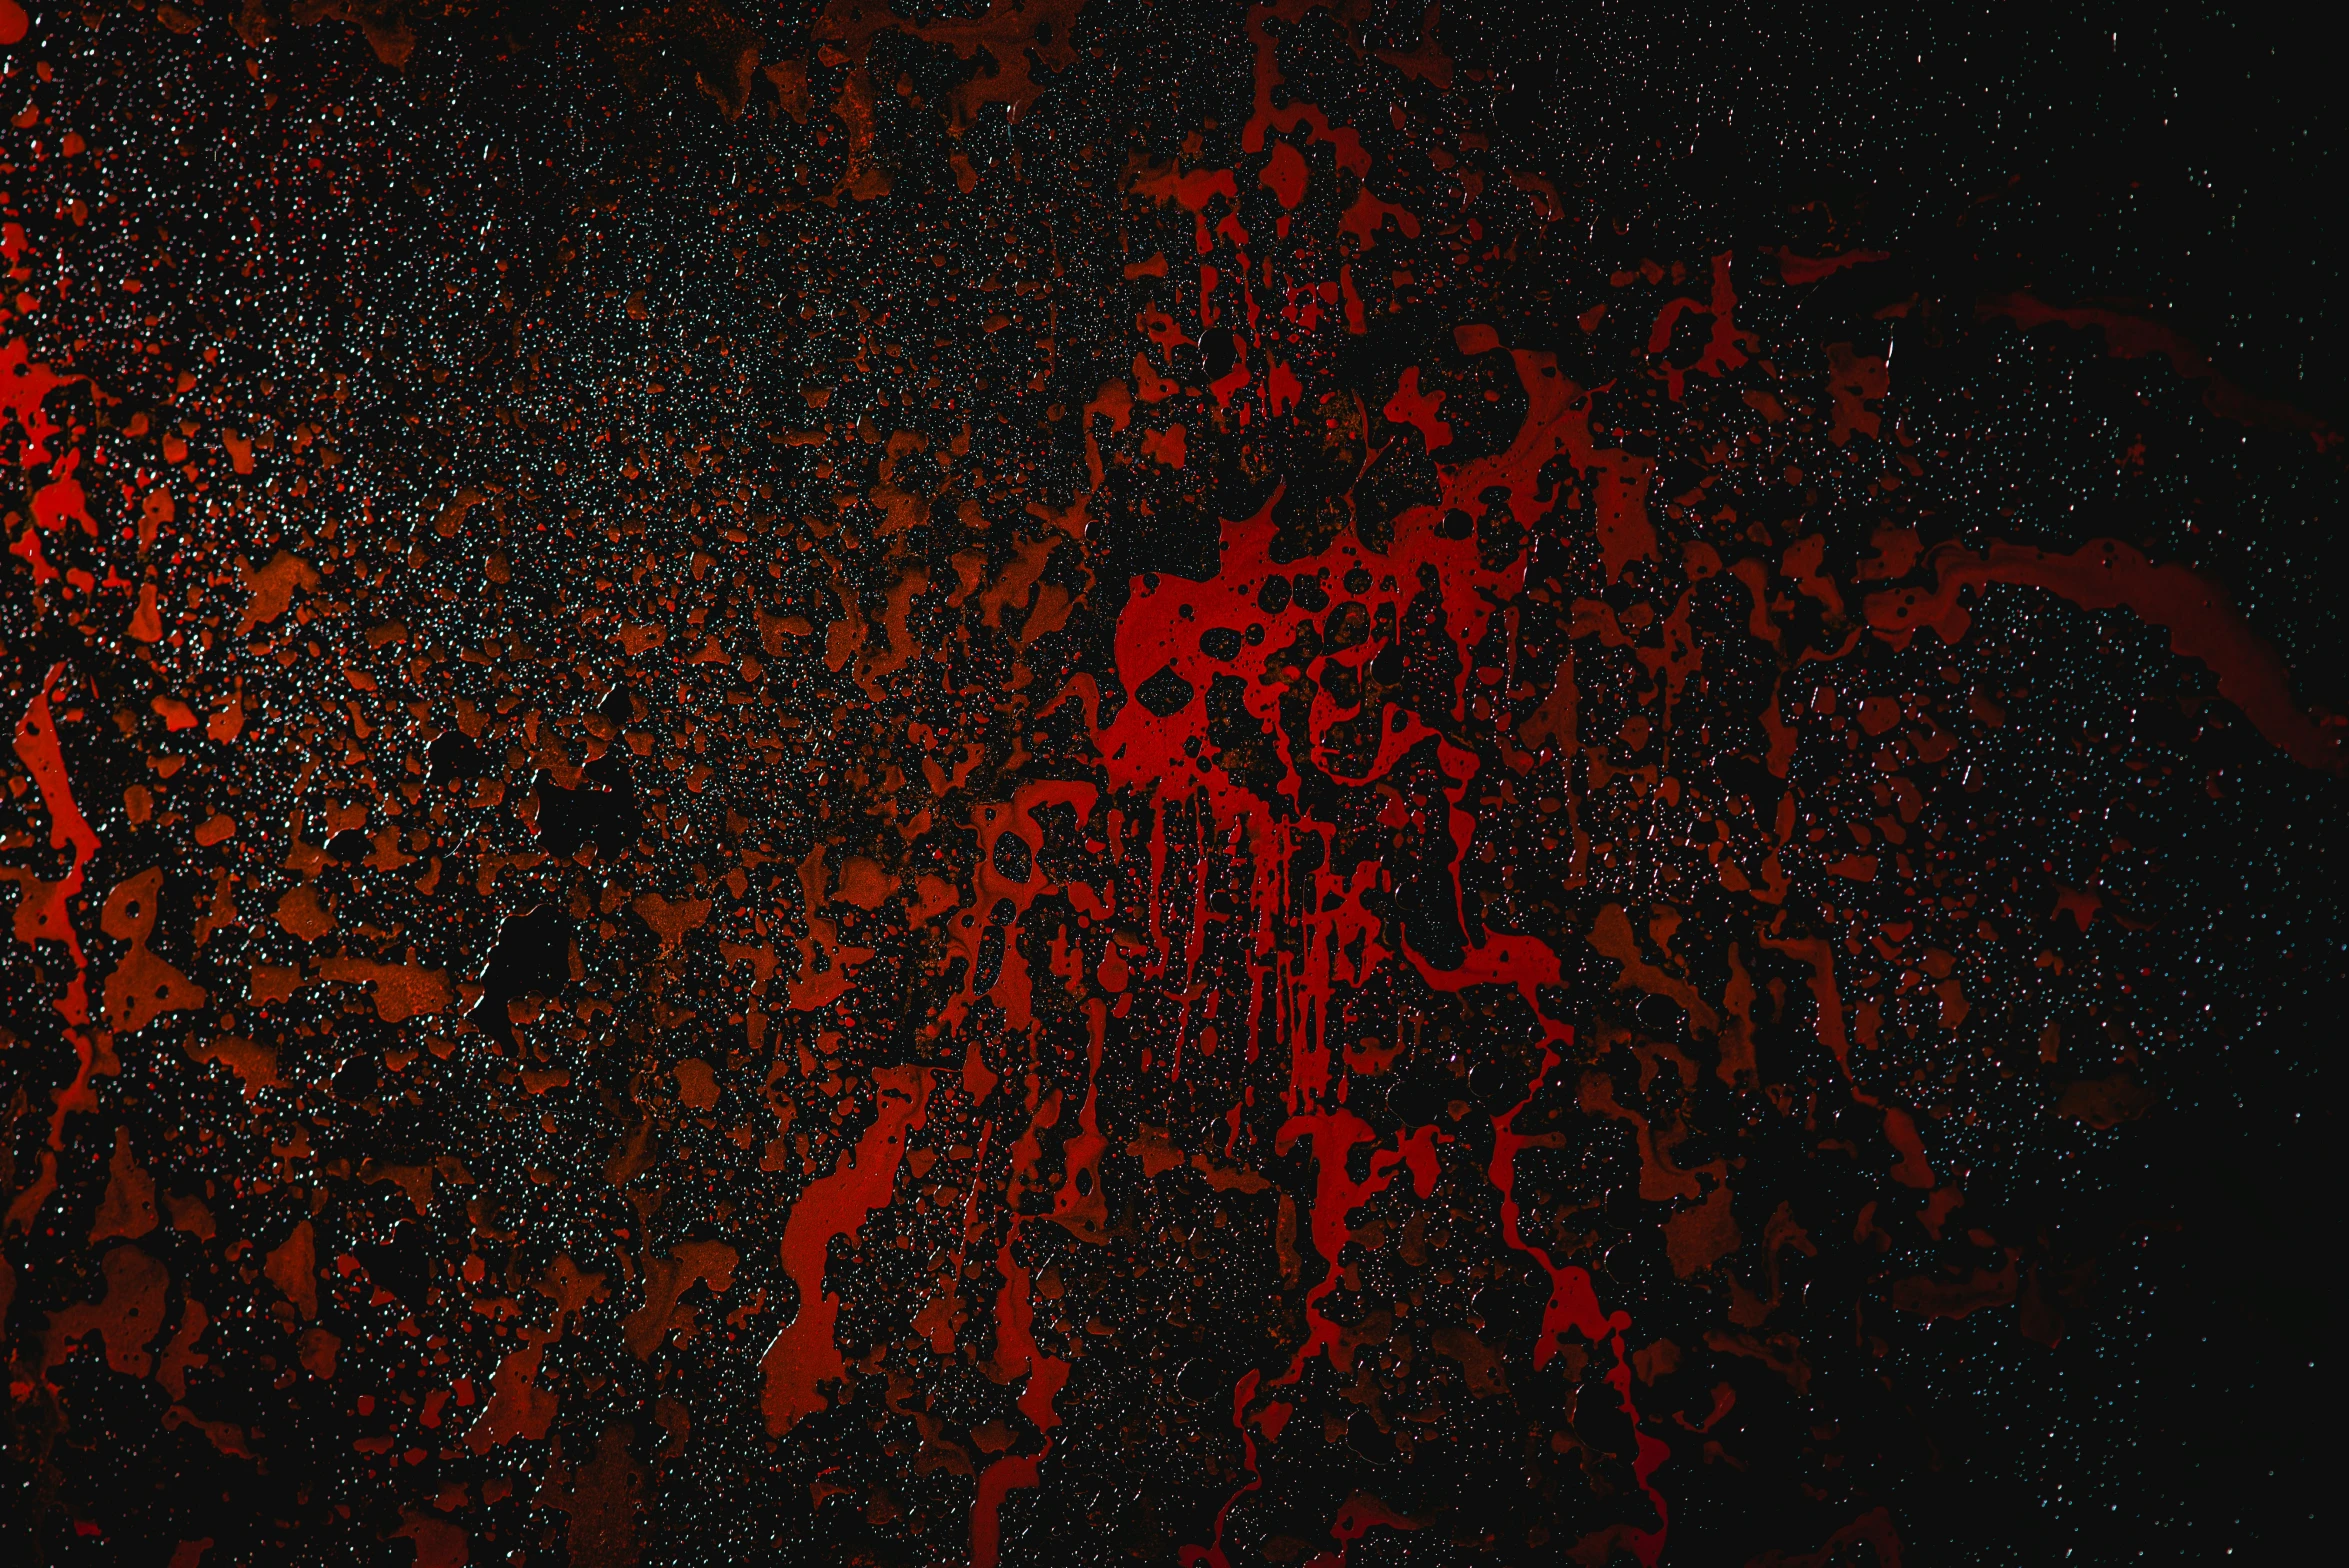 some red paint splashes on a black background